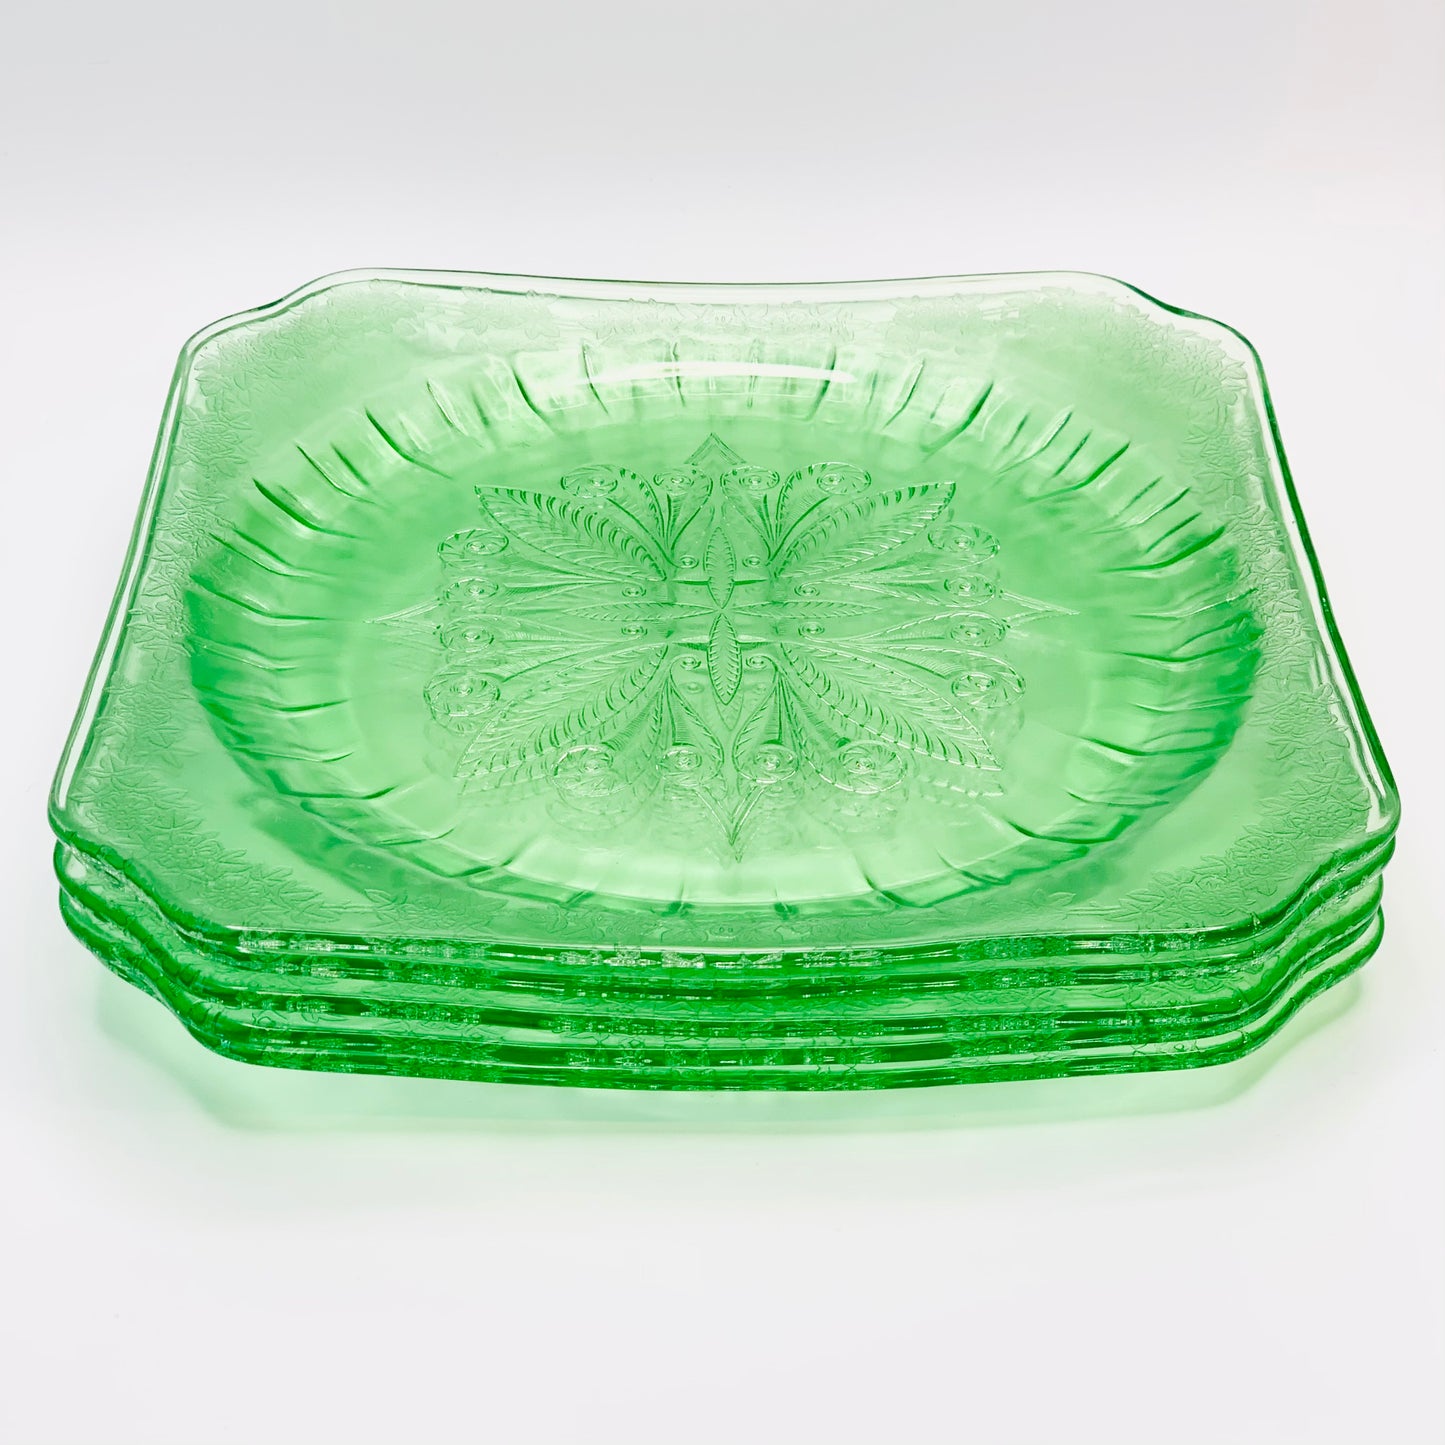 Extremely rare antique Art Deco uranium glass plate in the princess pattern